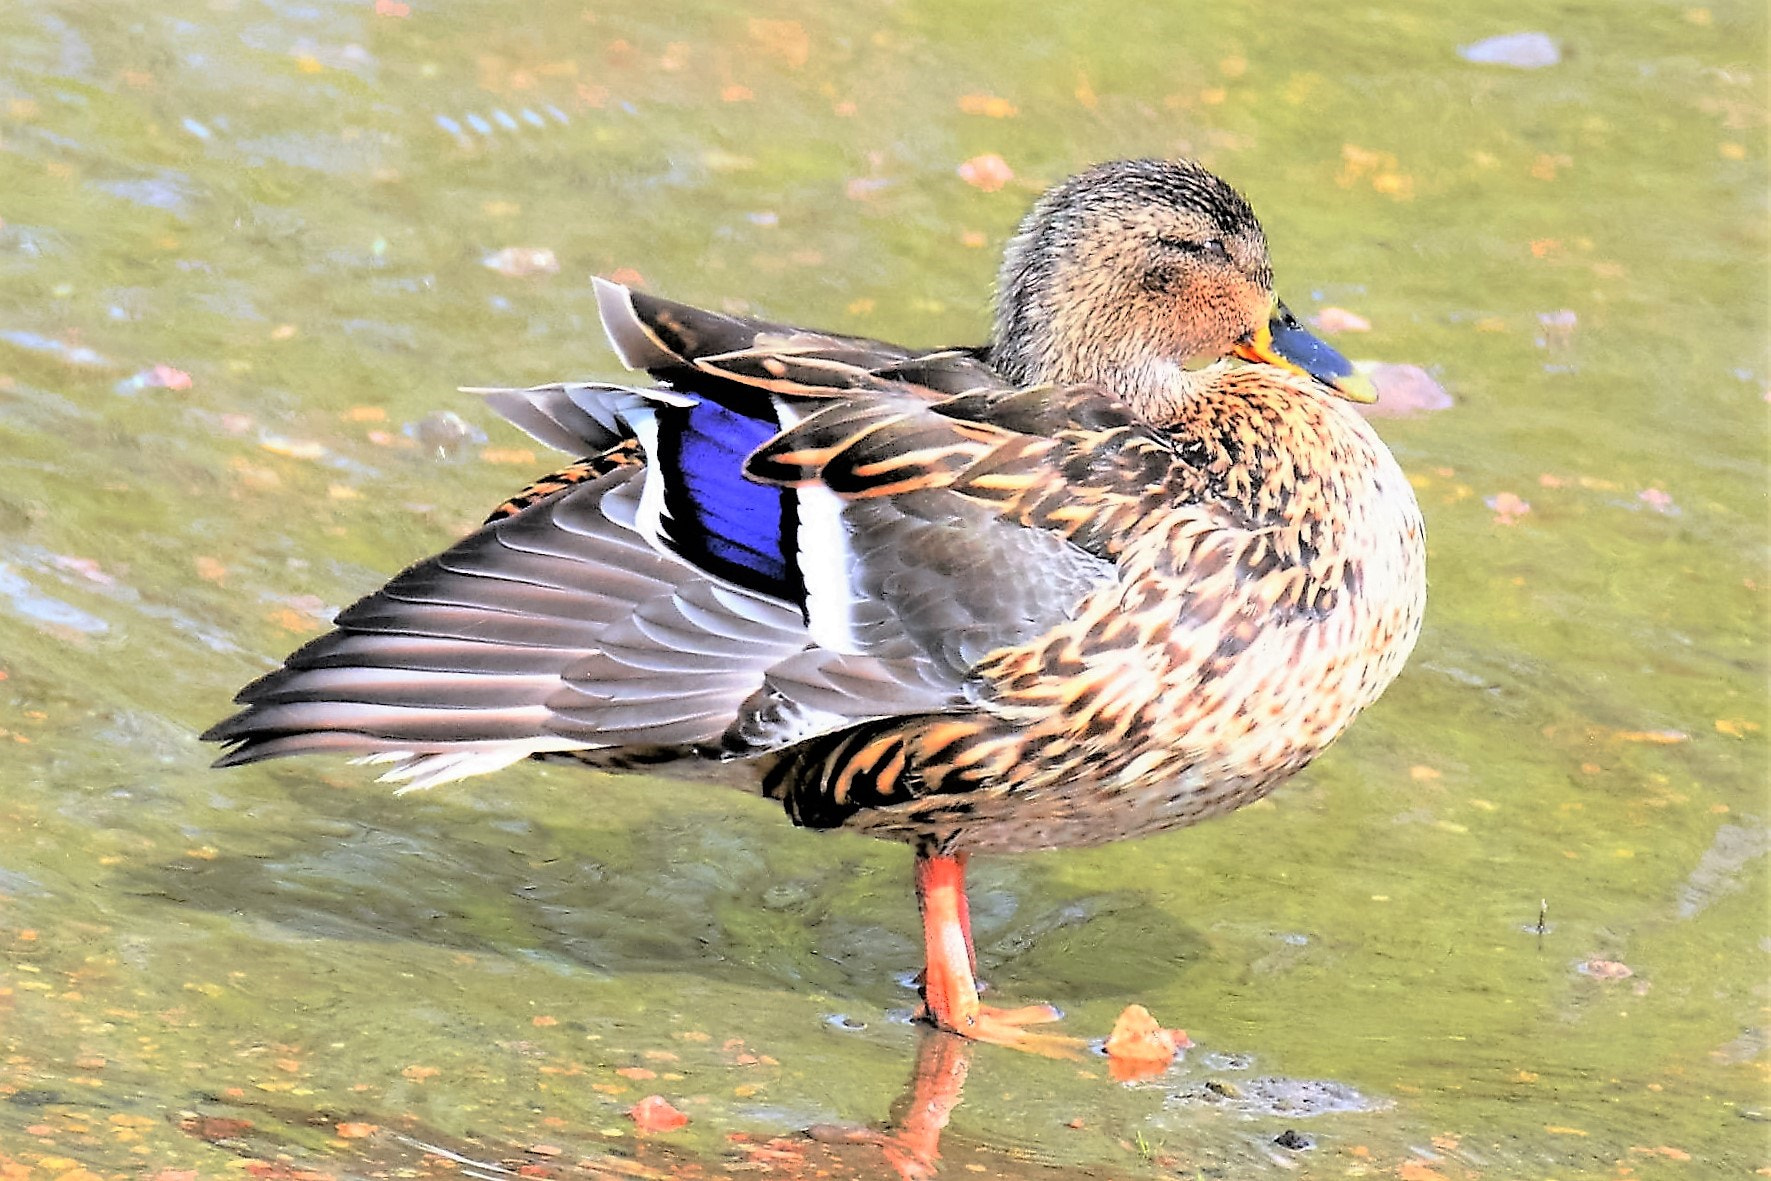 Nikon D3300 sample photo. Ms duck, with the glow *;) photography